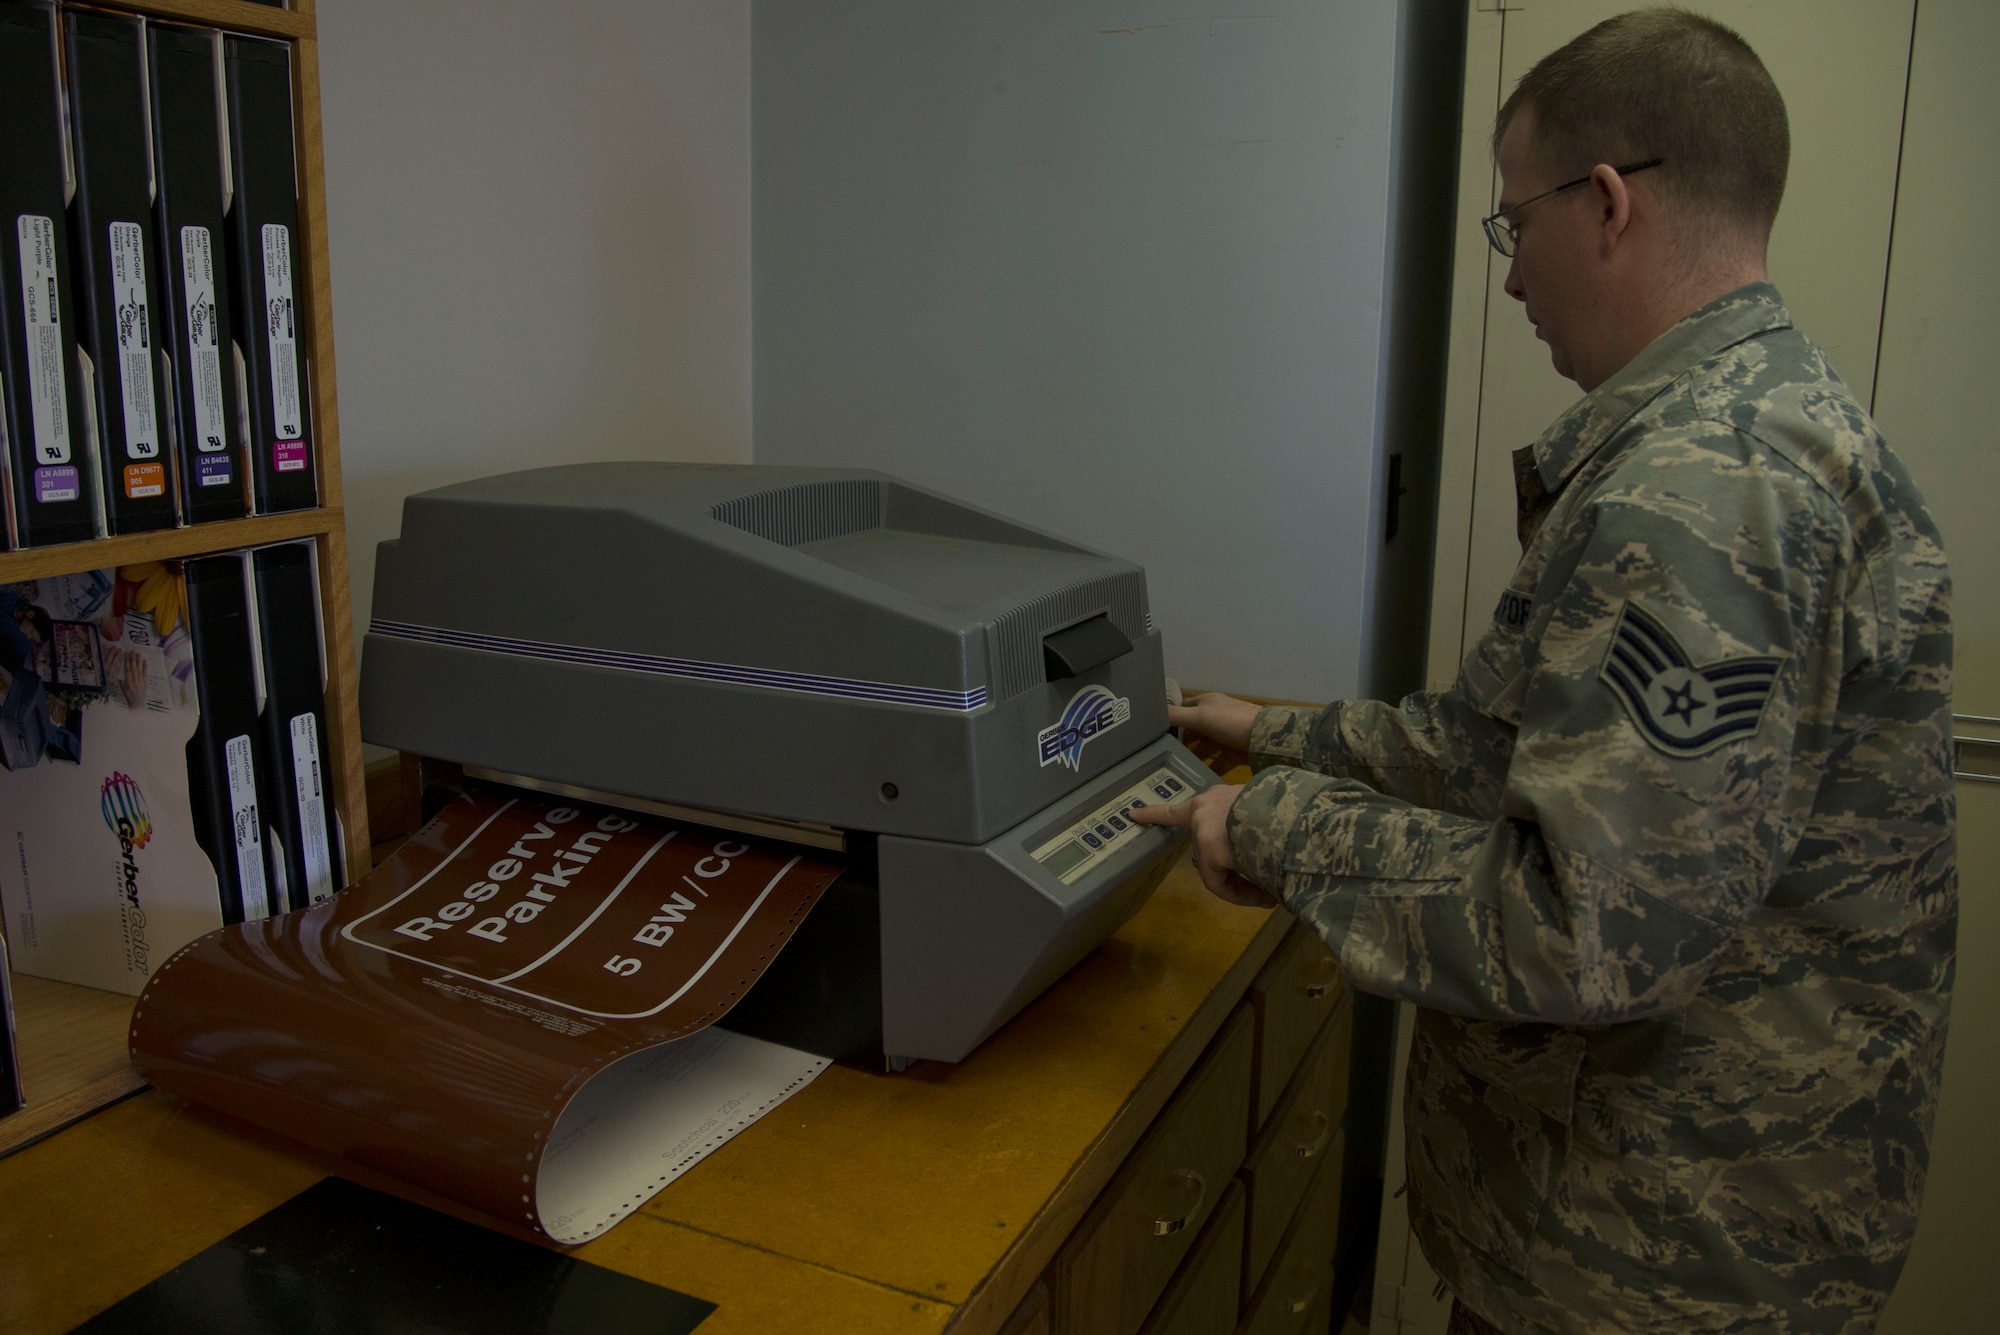 Staff Sgt. Horace Hand, 5th Civil Engineer Squadron structural craftsman, prints a sign at the sign shop on Minot Air Force Base, N.D., April 27, 2017. Thermal printers are used to produce images by selectively heating coated paper when passed over the print head. (U.S. Air Force photo/Airman 1st Class Dillon Audit)